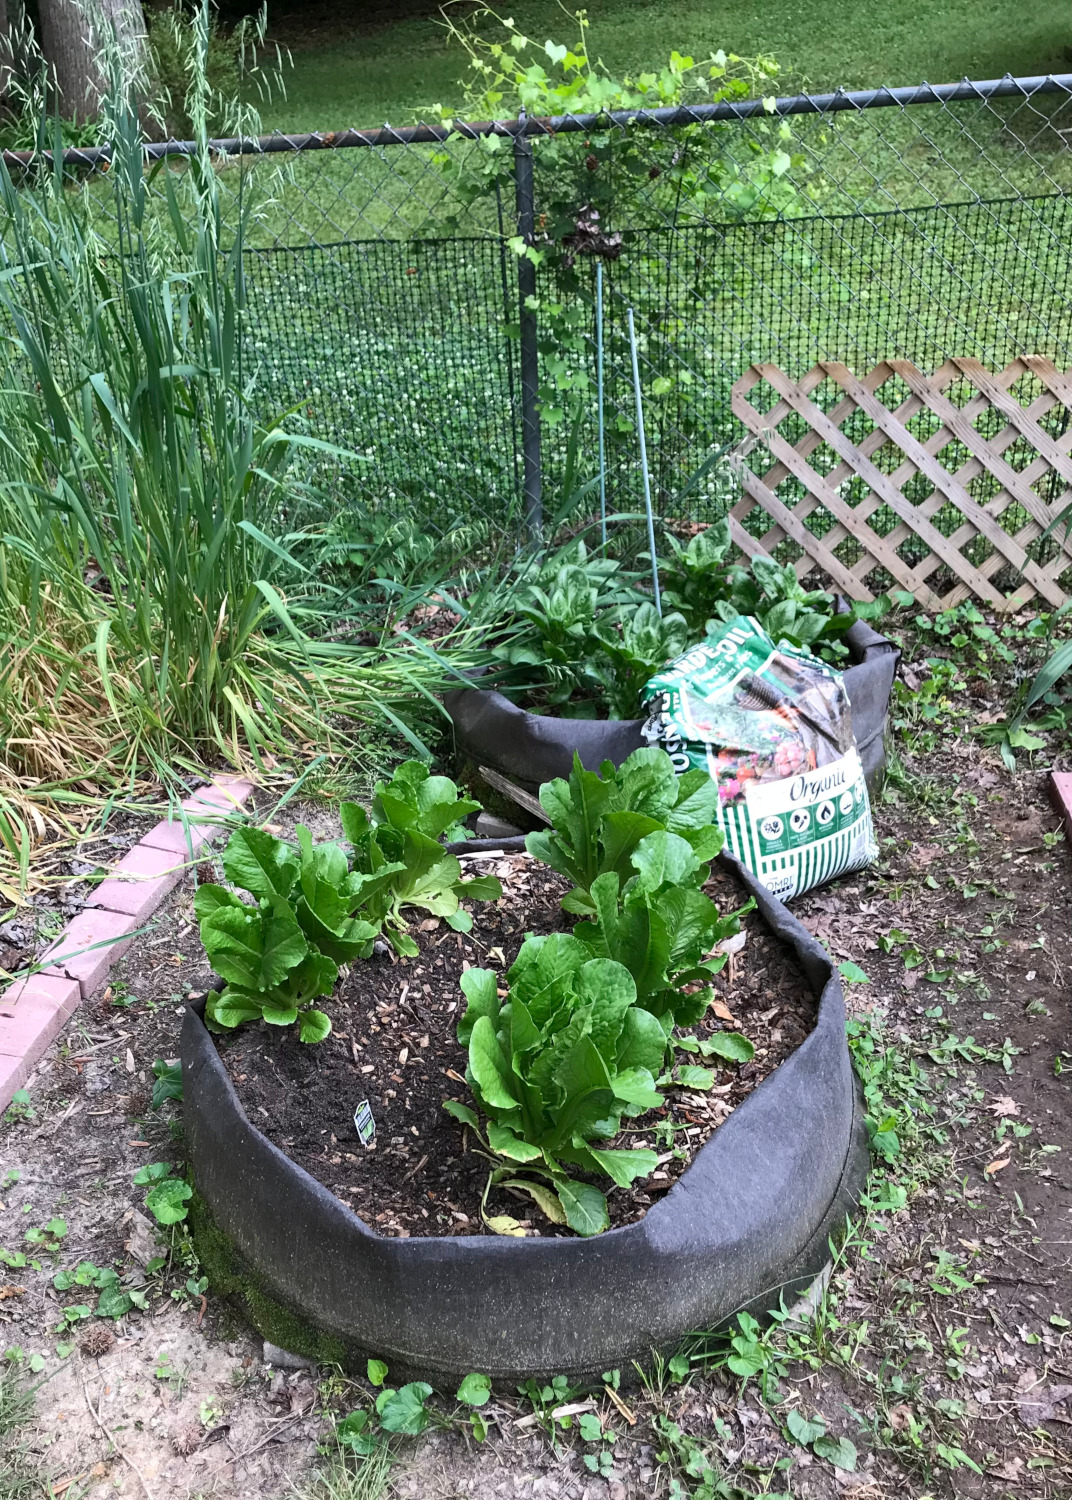 Spinach growing in the garden